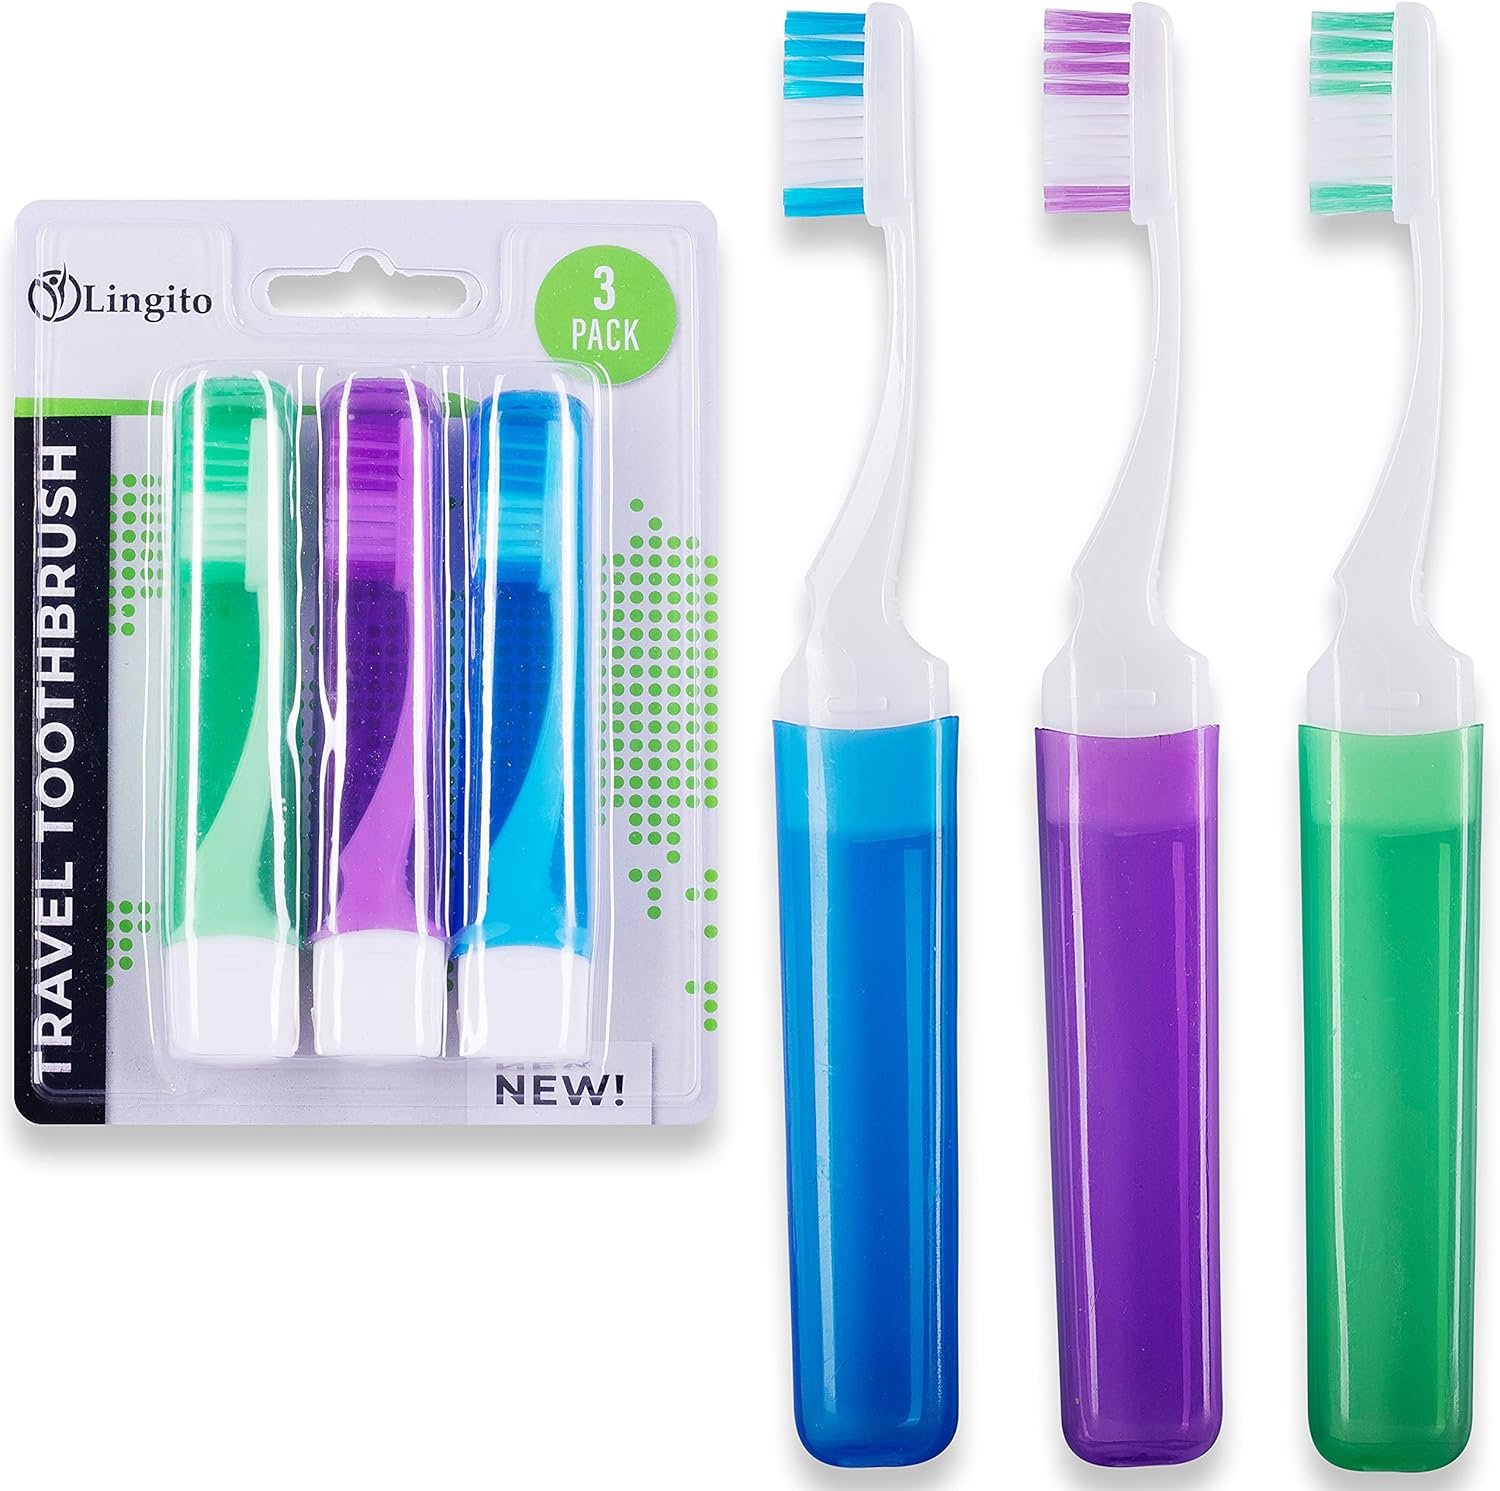 Travel toothbrushes